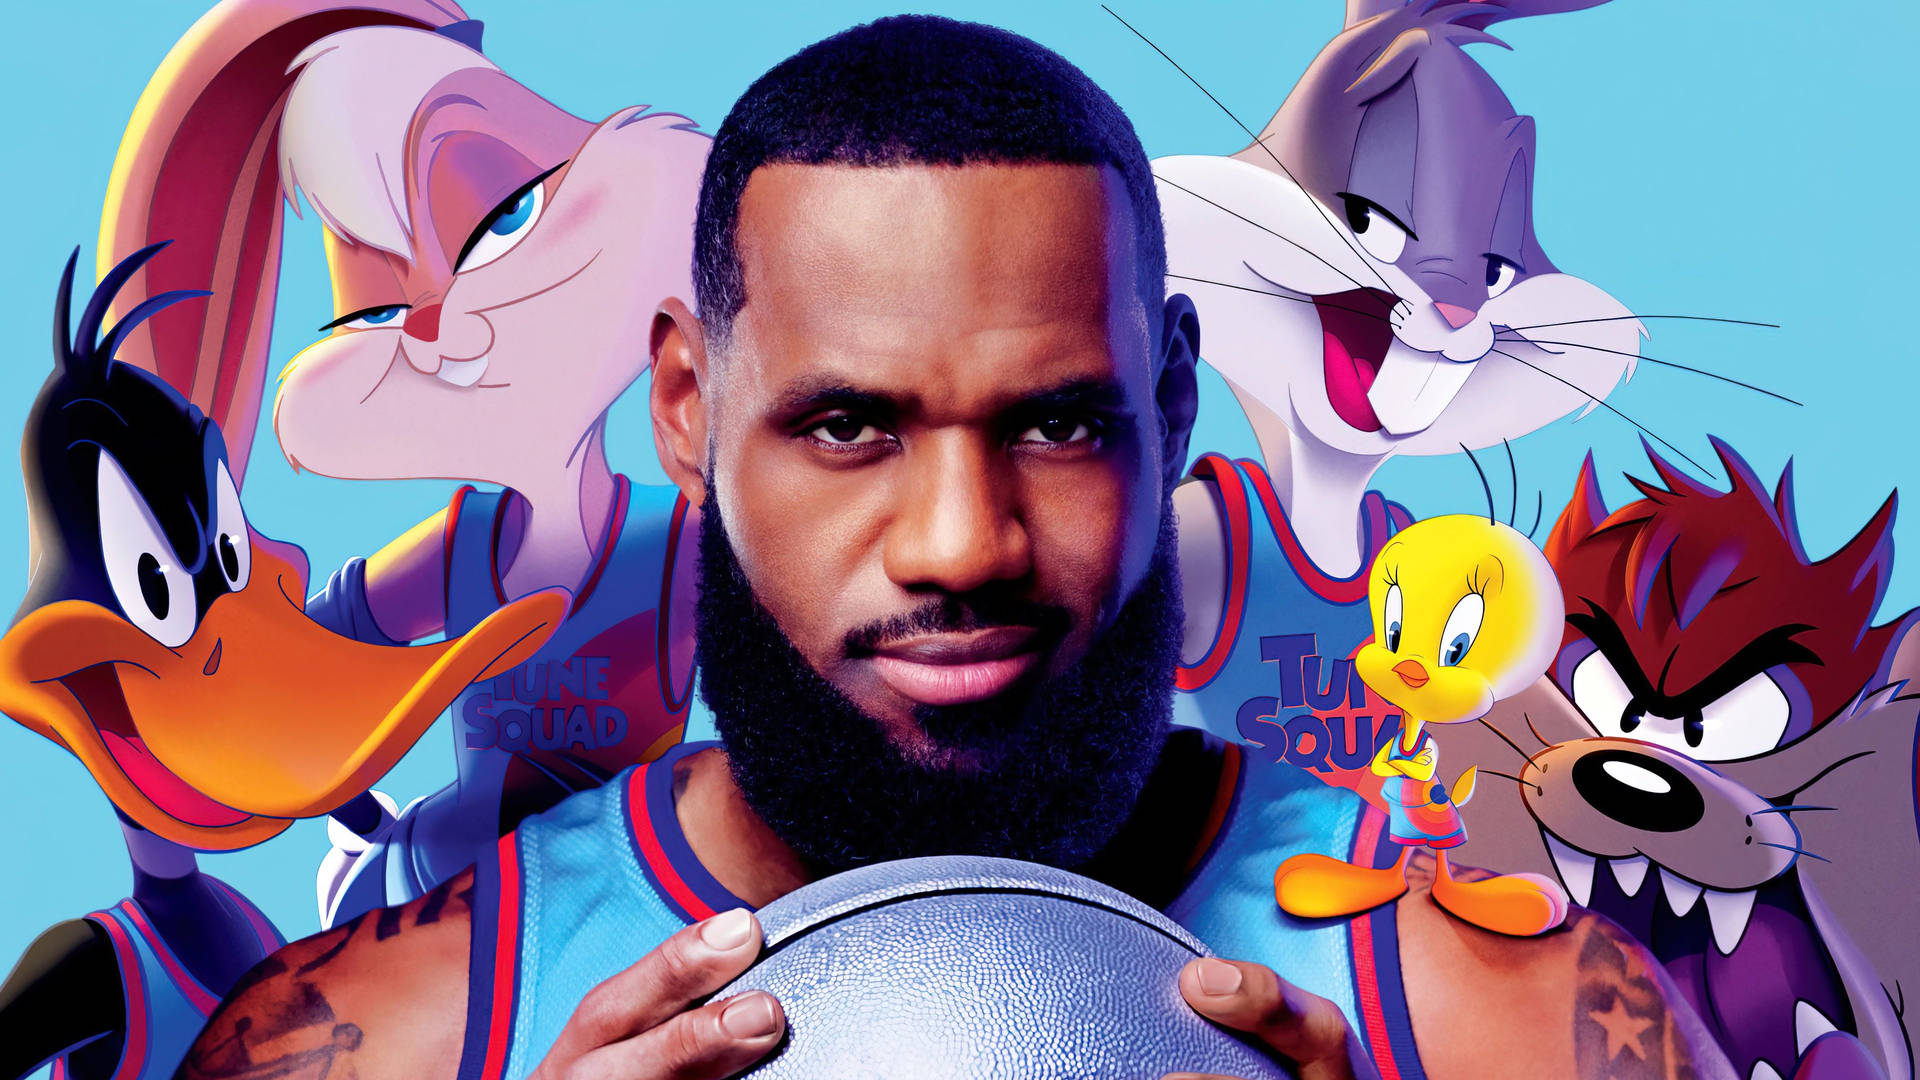 Space Jam 3840X2160 Wallpaper and Background Image